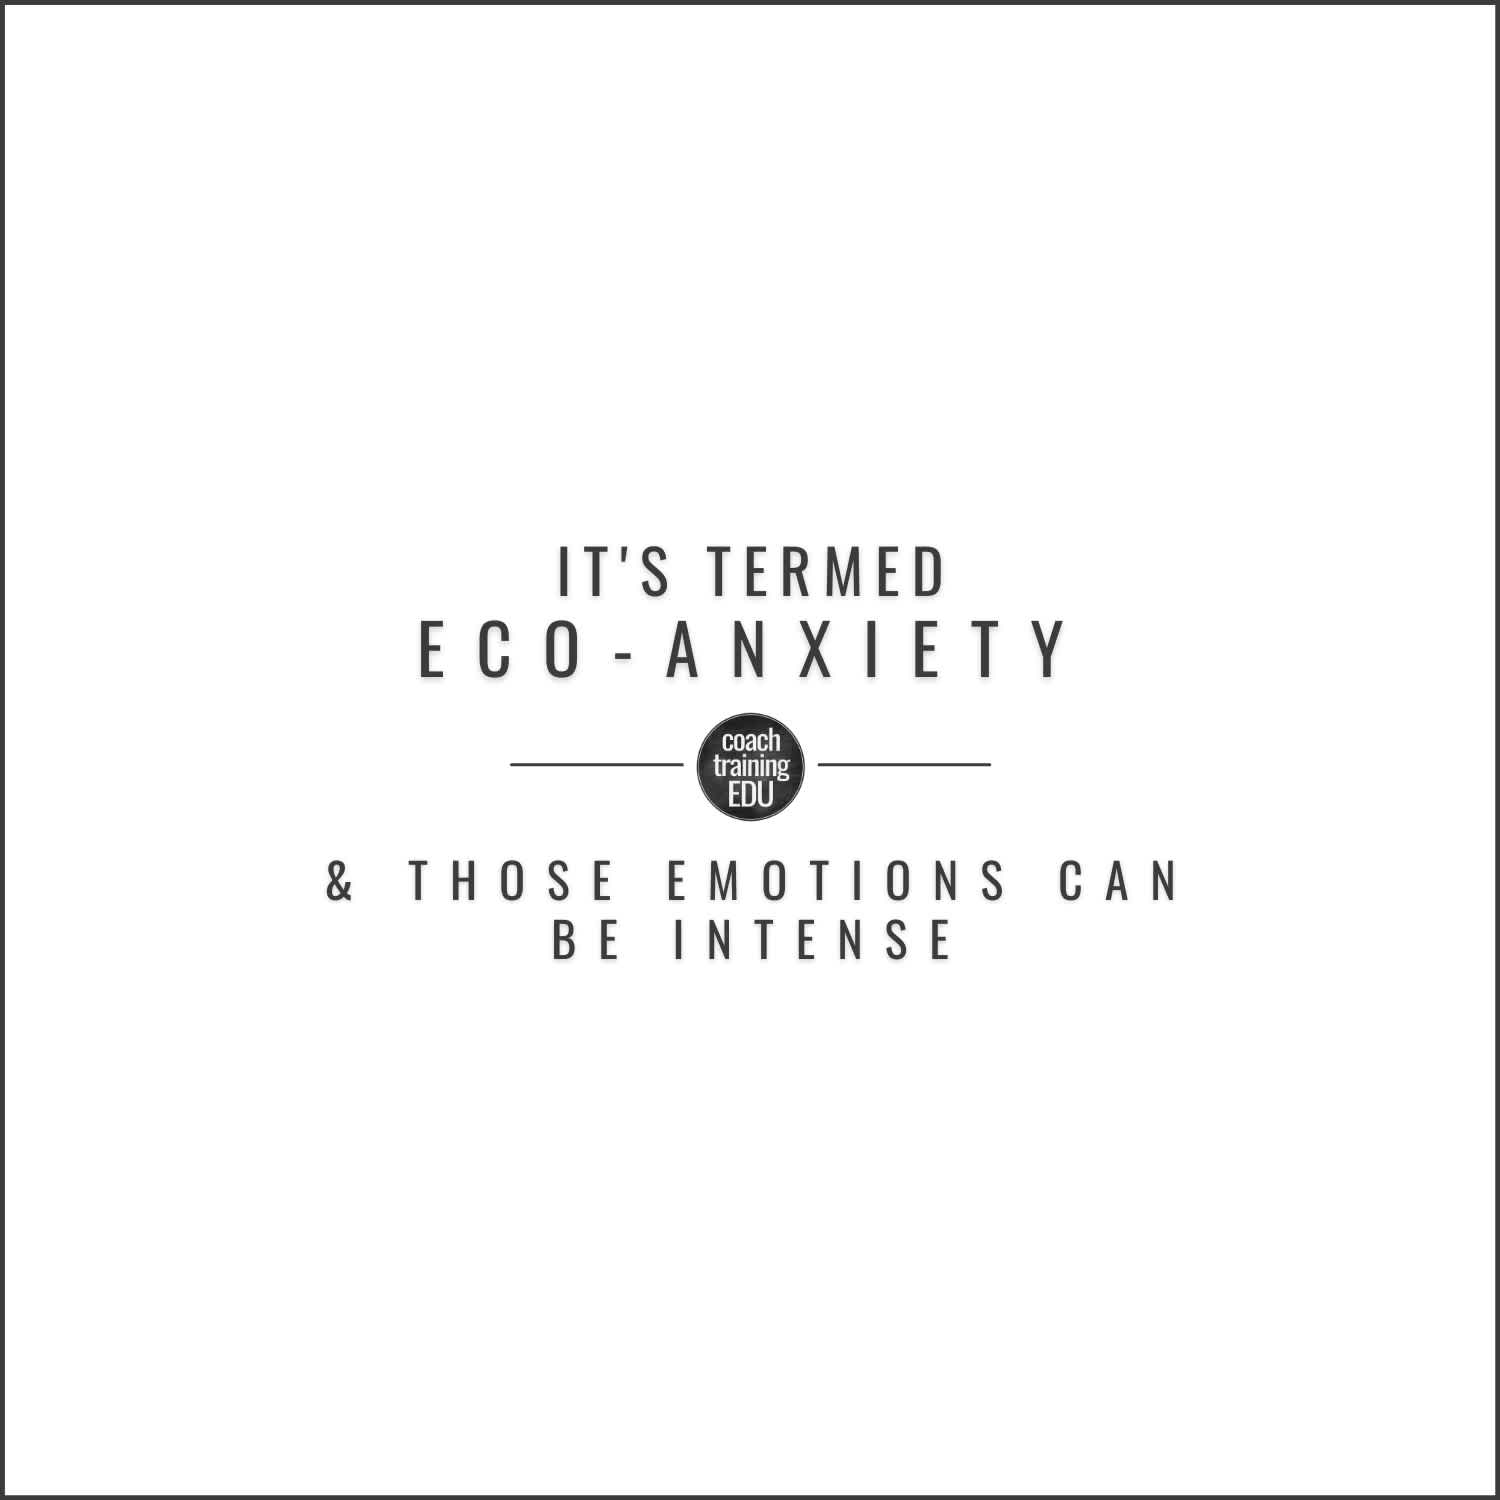 It's Termed Eco-Anxiety